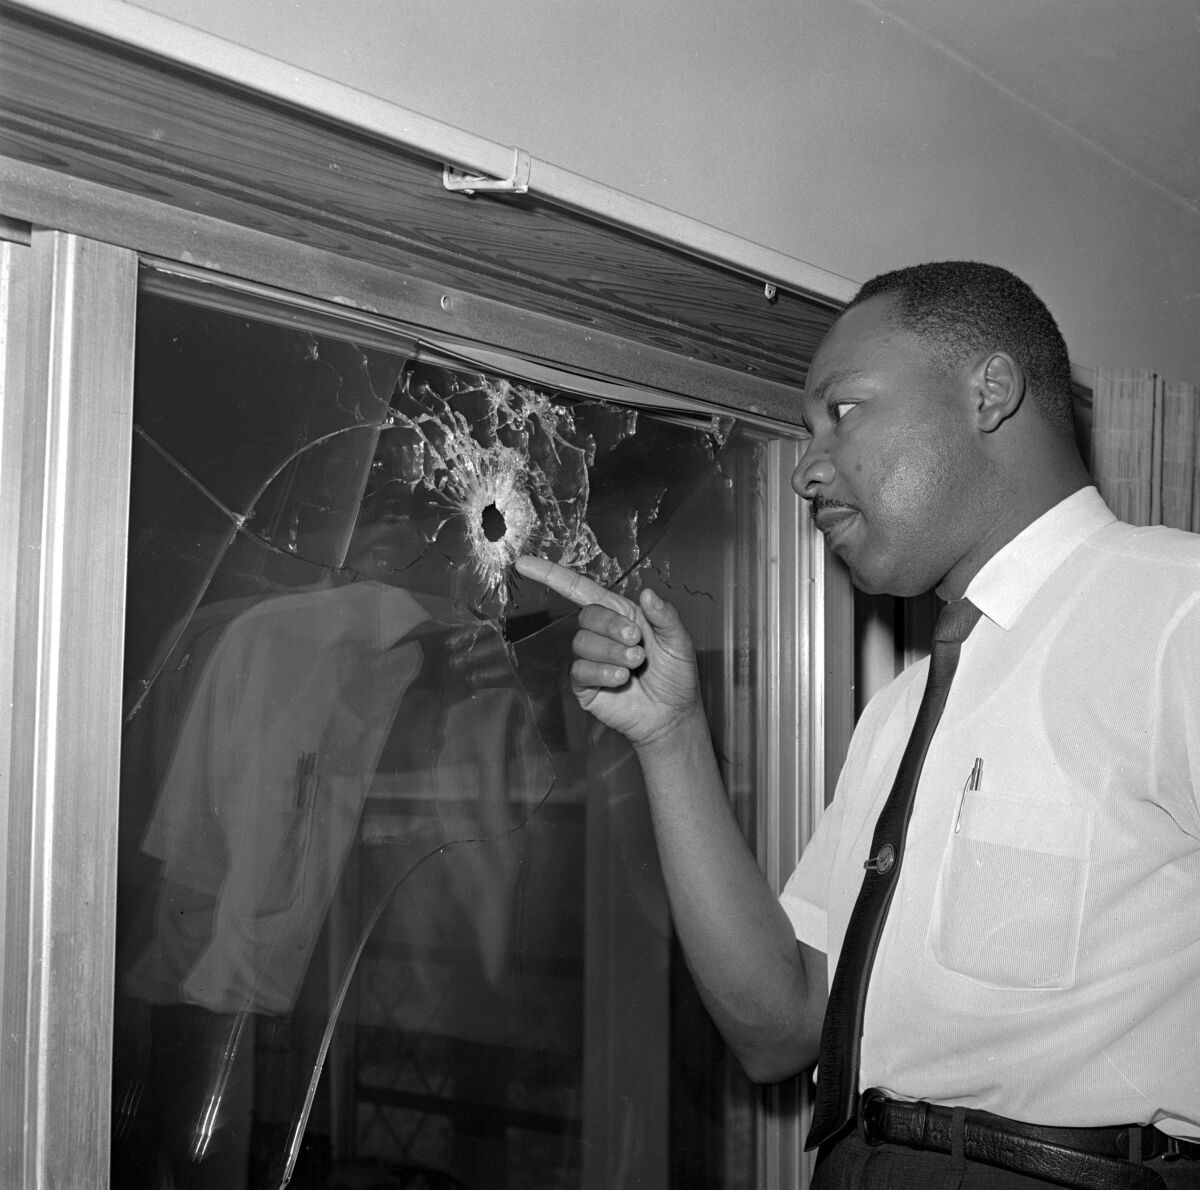 FILE - In this June 5, 1964, file photo, Dr. Martin Luther King Jr. looks at a glass door of his rented beach cottage in St. Augustine, Fla., that was shot into. The house connected to King is now in the hands of a couple who plans to preserve it. David Manaute and Patti Barry live in the house on the coastline south of St. Augustine. (AP Photo/Jim Kerlin, File)